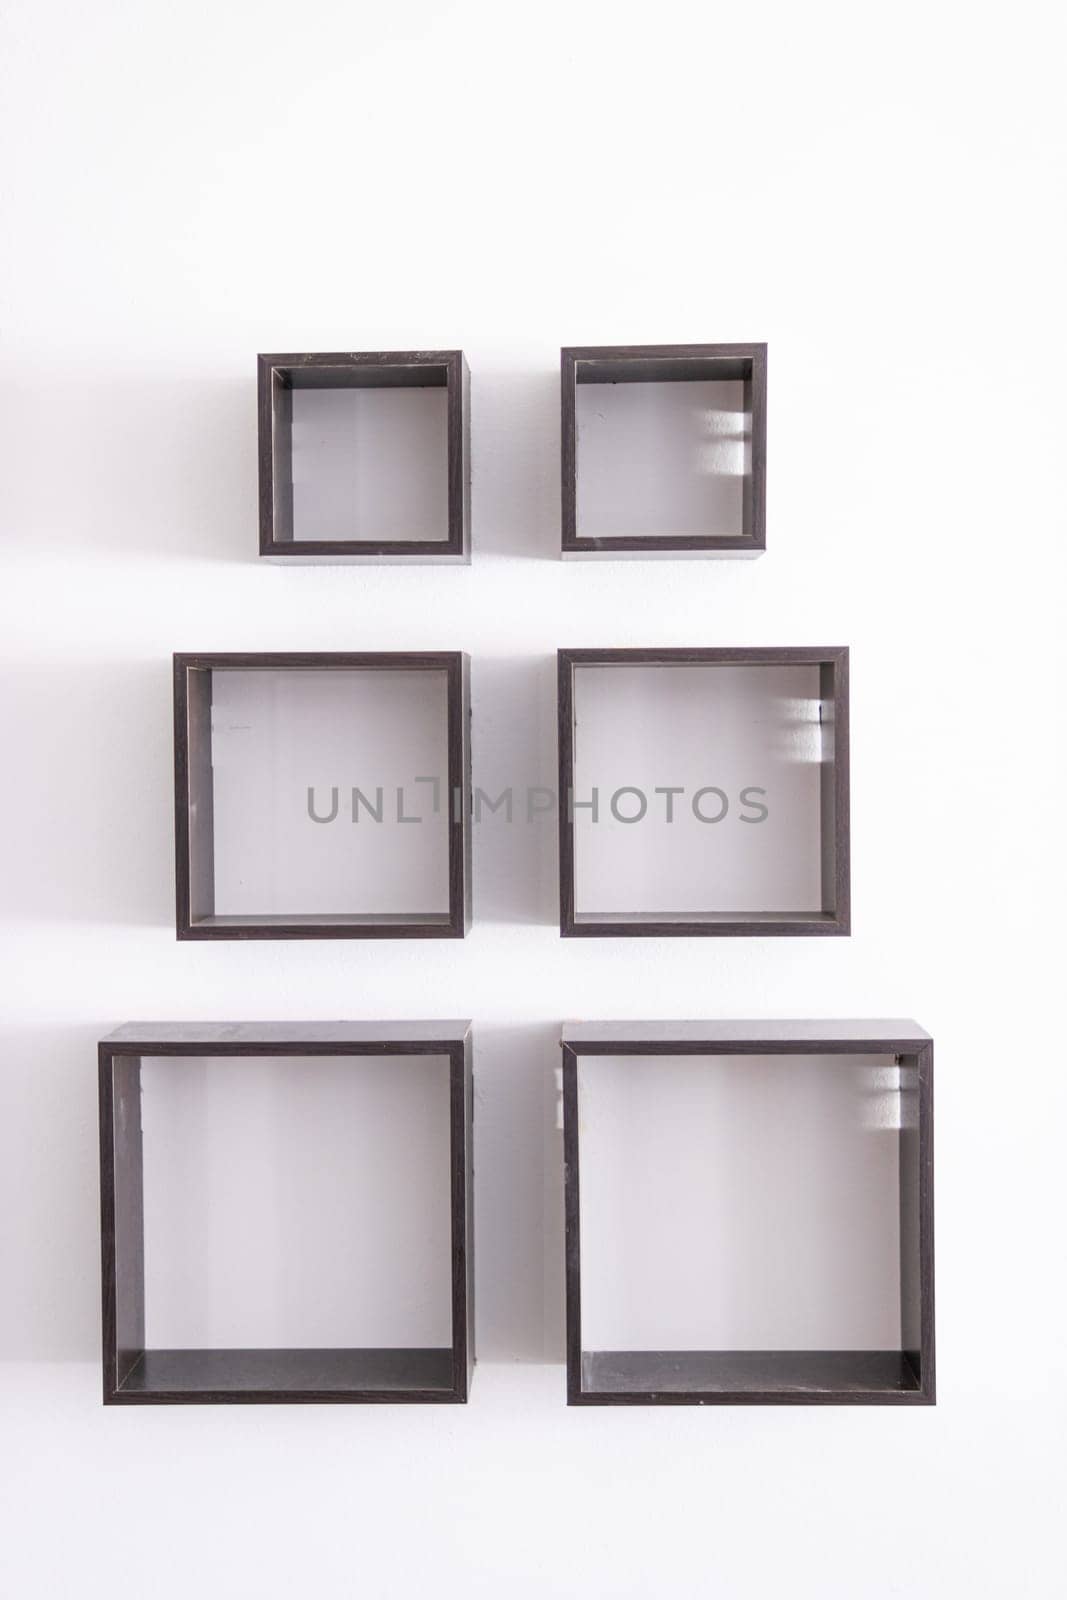 designer shelves on a white wall in an apartment.Design concept. High quality photo